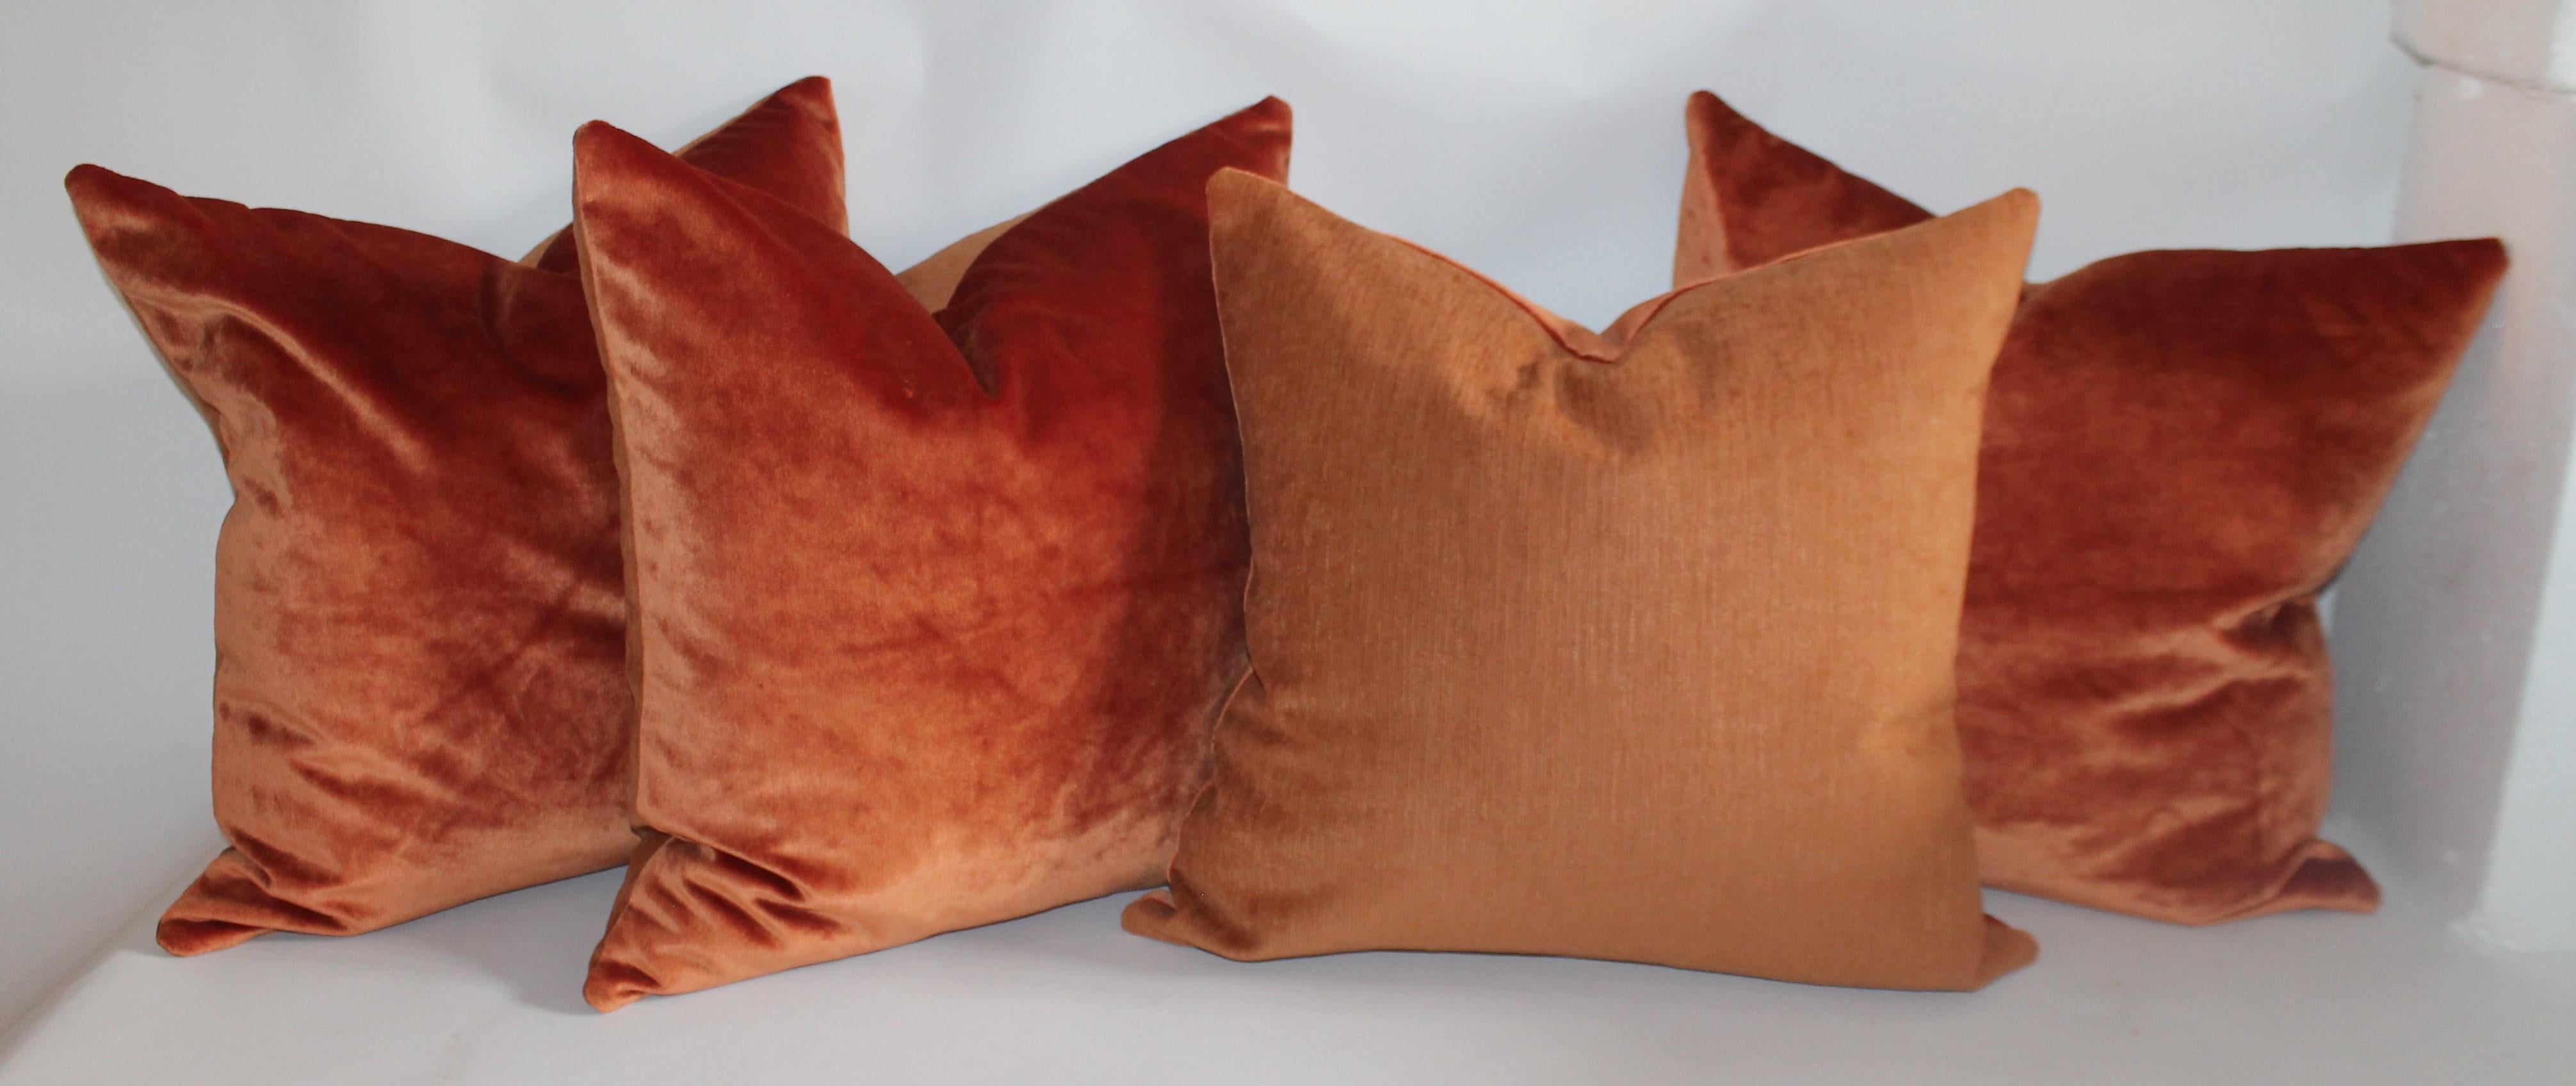 These amazing cinnamon velvet pillows are so smooth and silky with a ridged cotton linen backings. Sold as a group of four or two pairs.